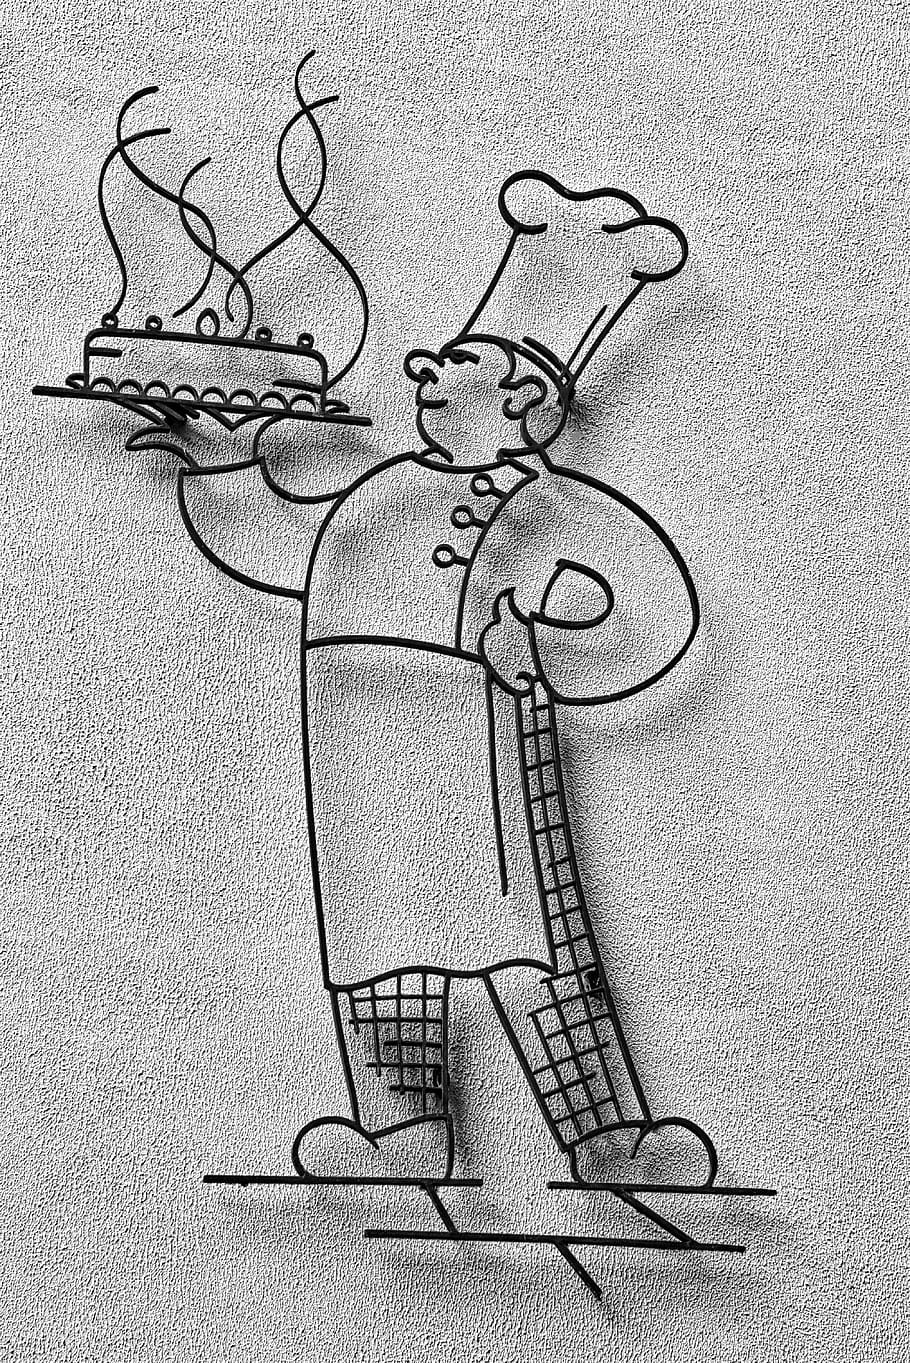 baker, wall, sketch, cake, black and white, frame, advertising, pastry chef, creativity, drawing - art product